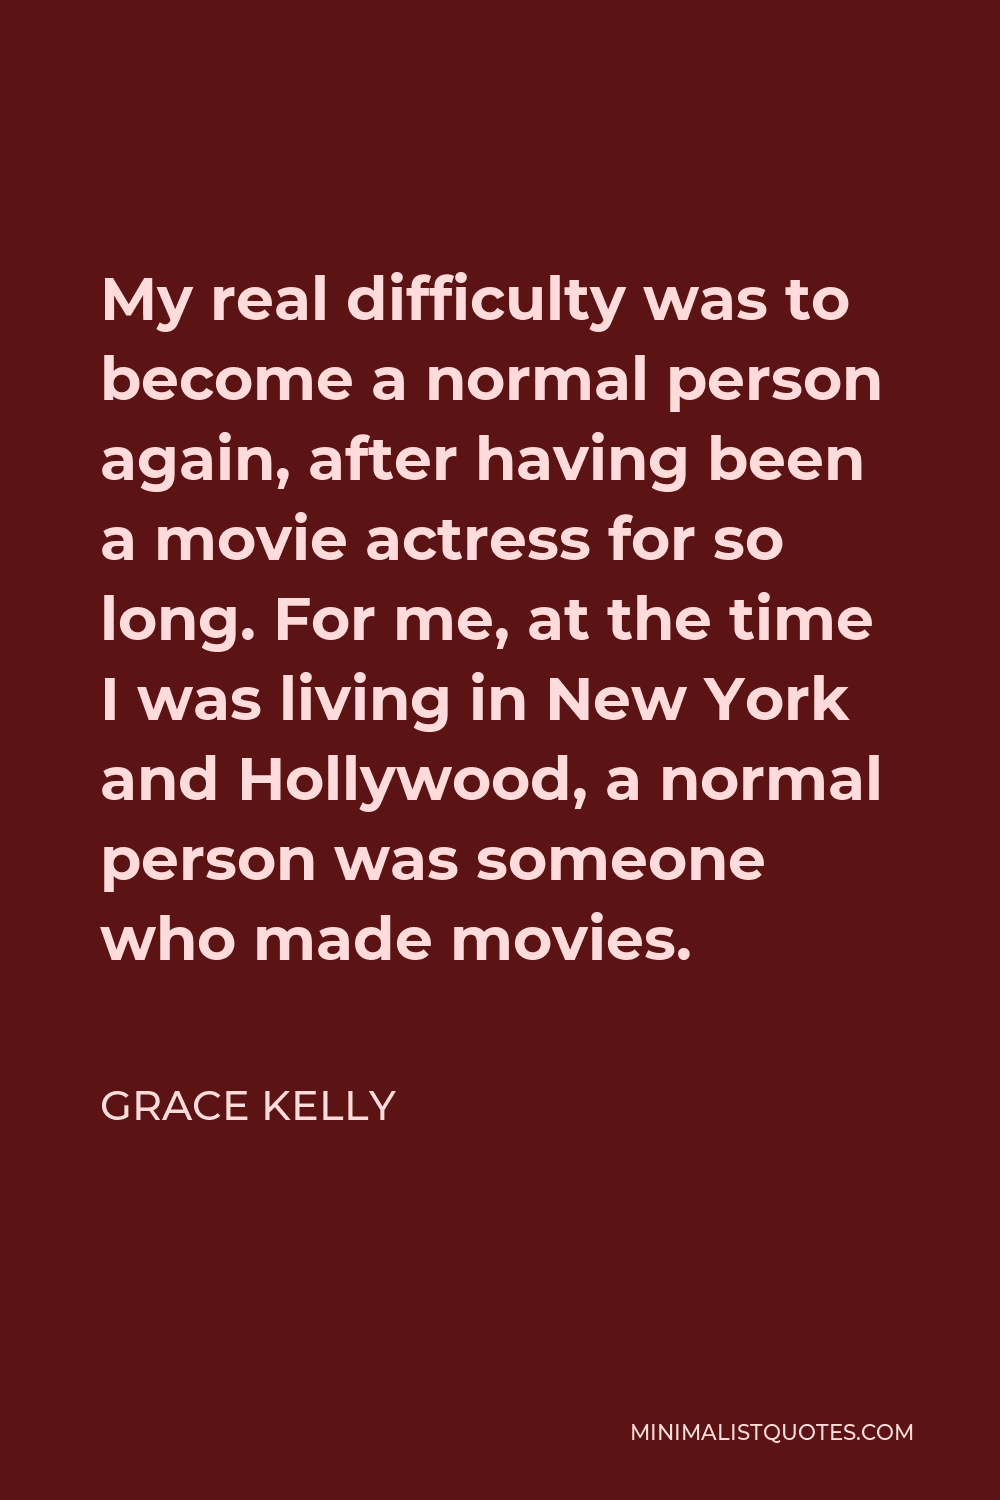 Grace Kelly Quote - My real difficulty was to become a normal person again, after having been a movie actress for so long. For me, at the time I was living in New York and Hollywood, a normal person was someone who made movies.